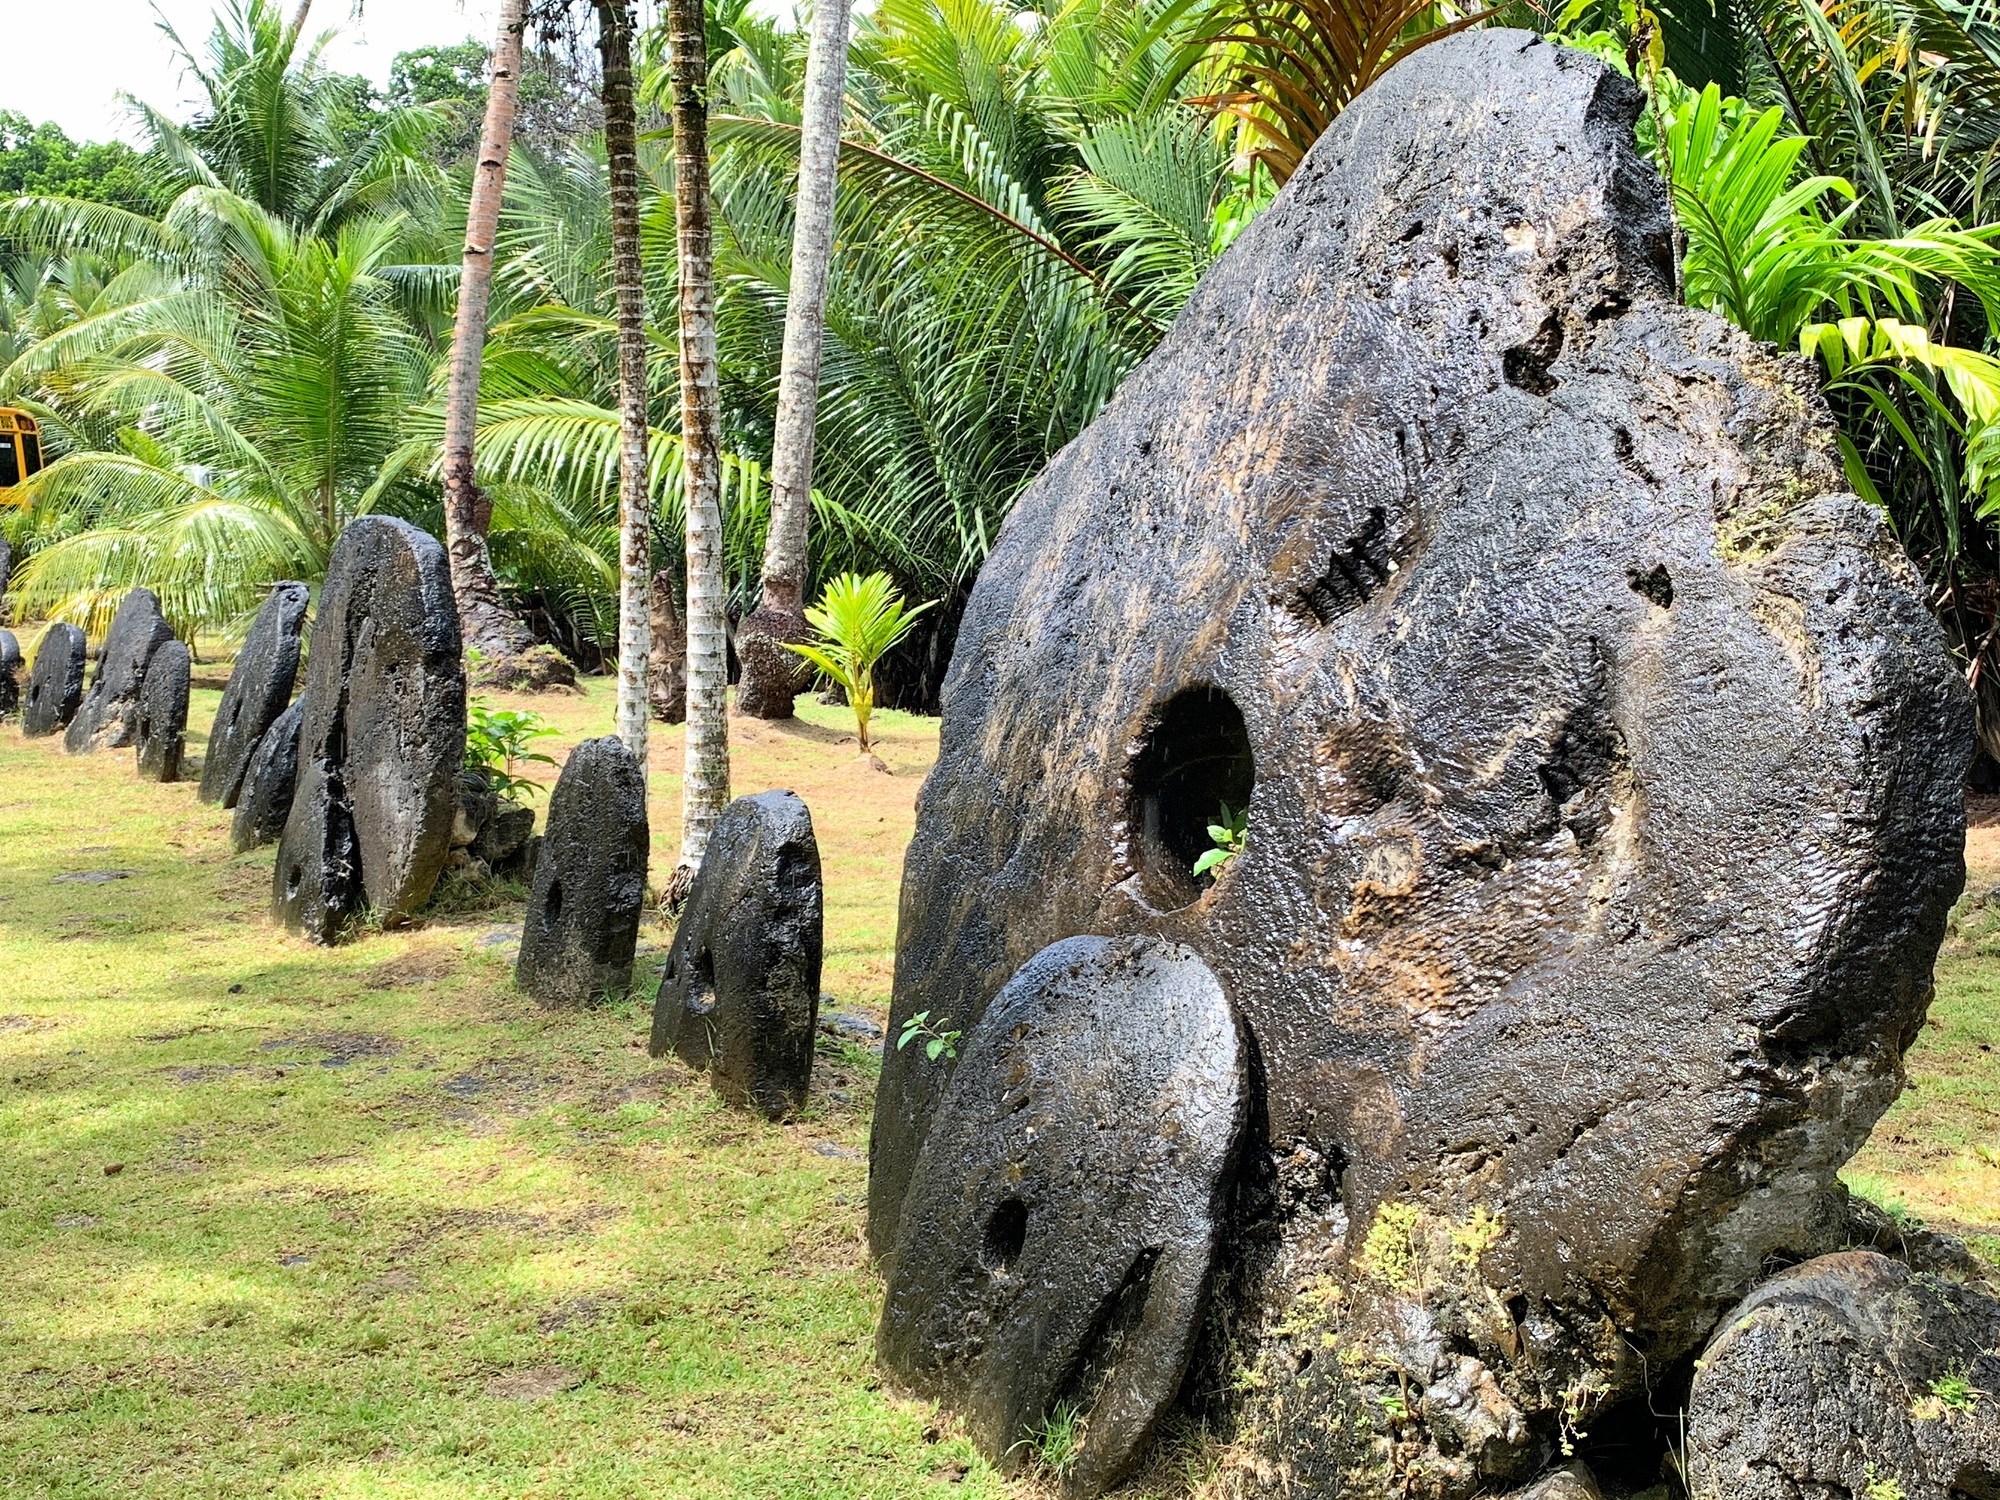 A group of rai stones aligned in the ground of Yap island